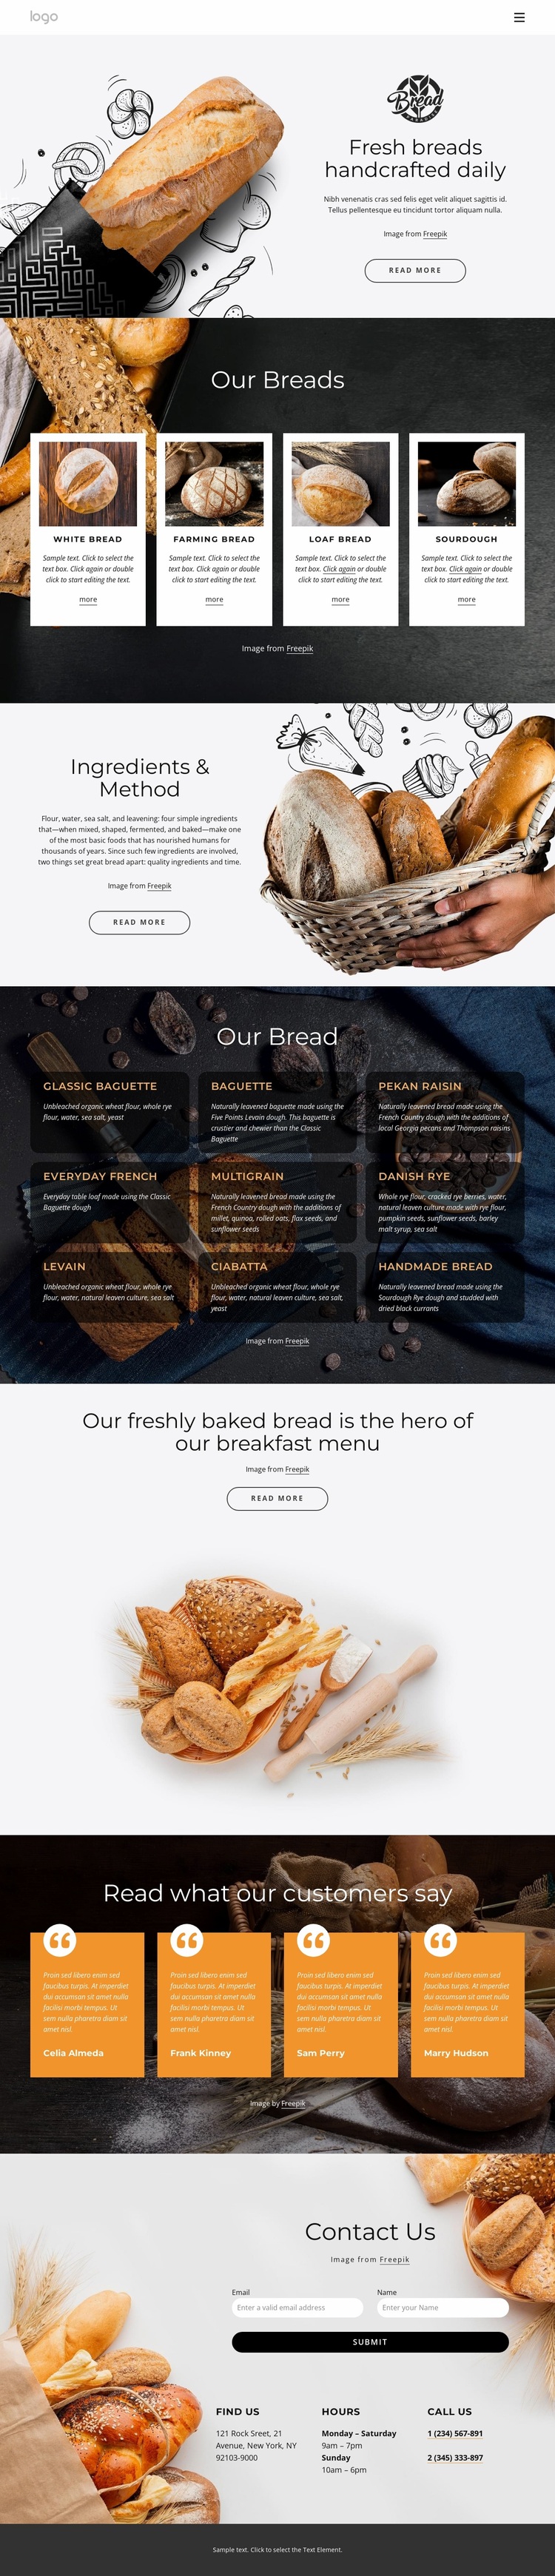 Fresh bread handcrafted every day Website Design